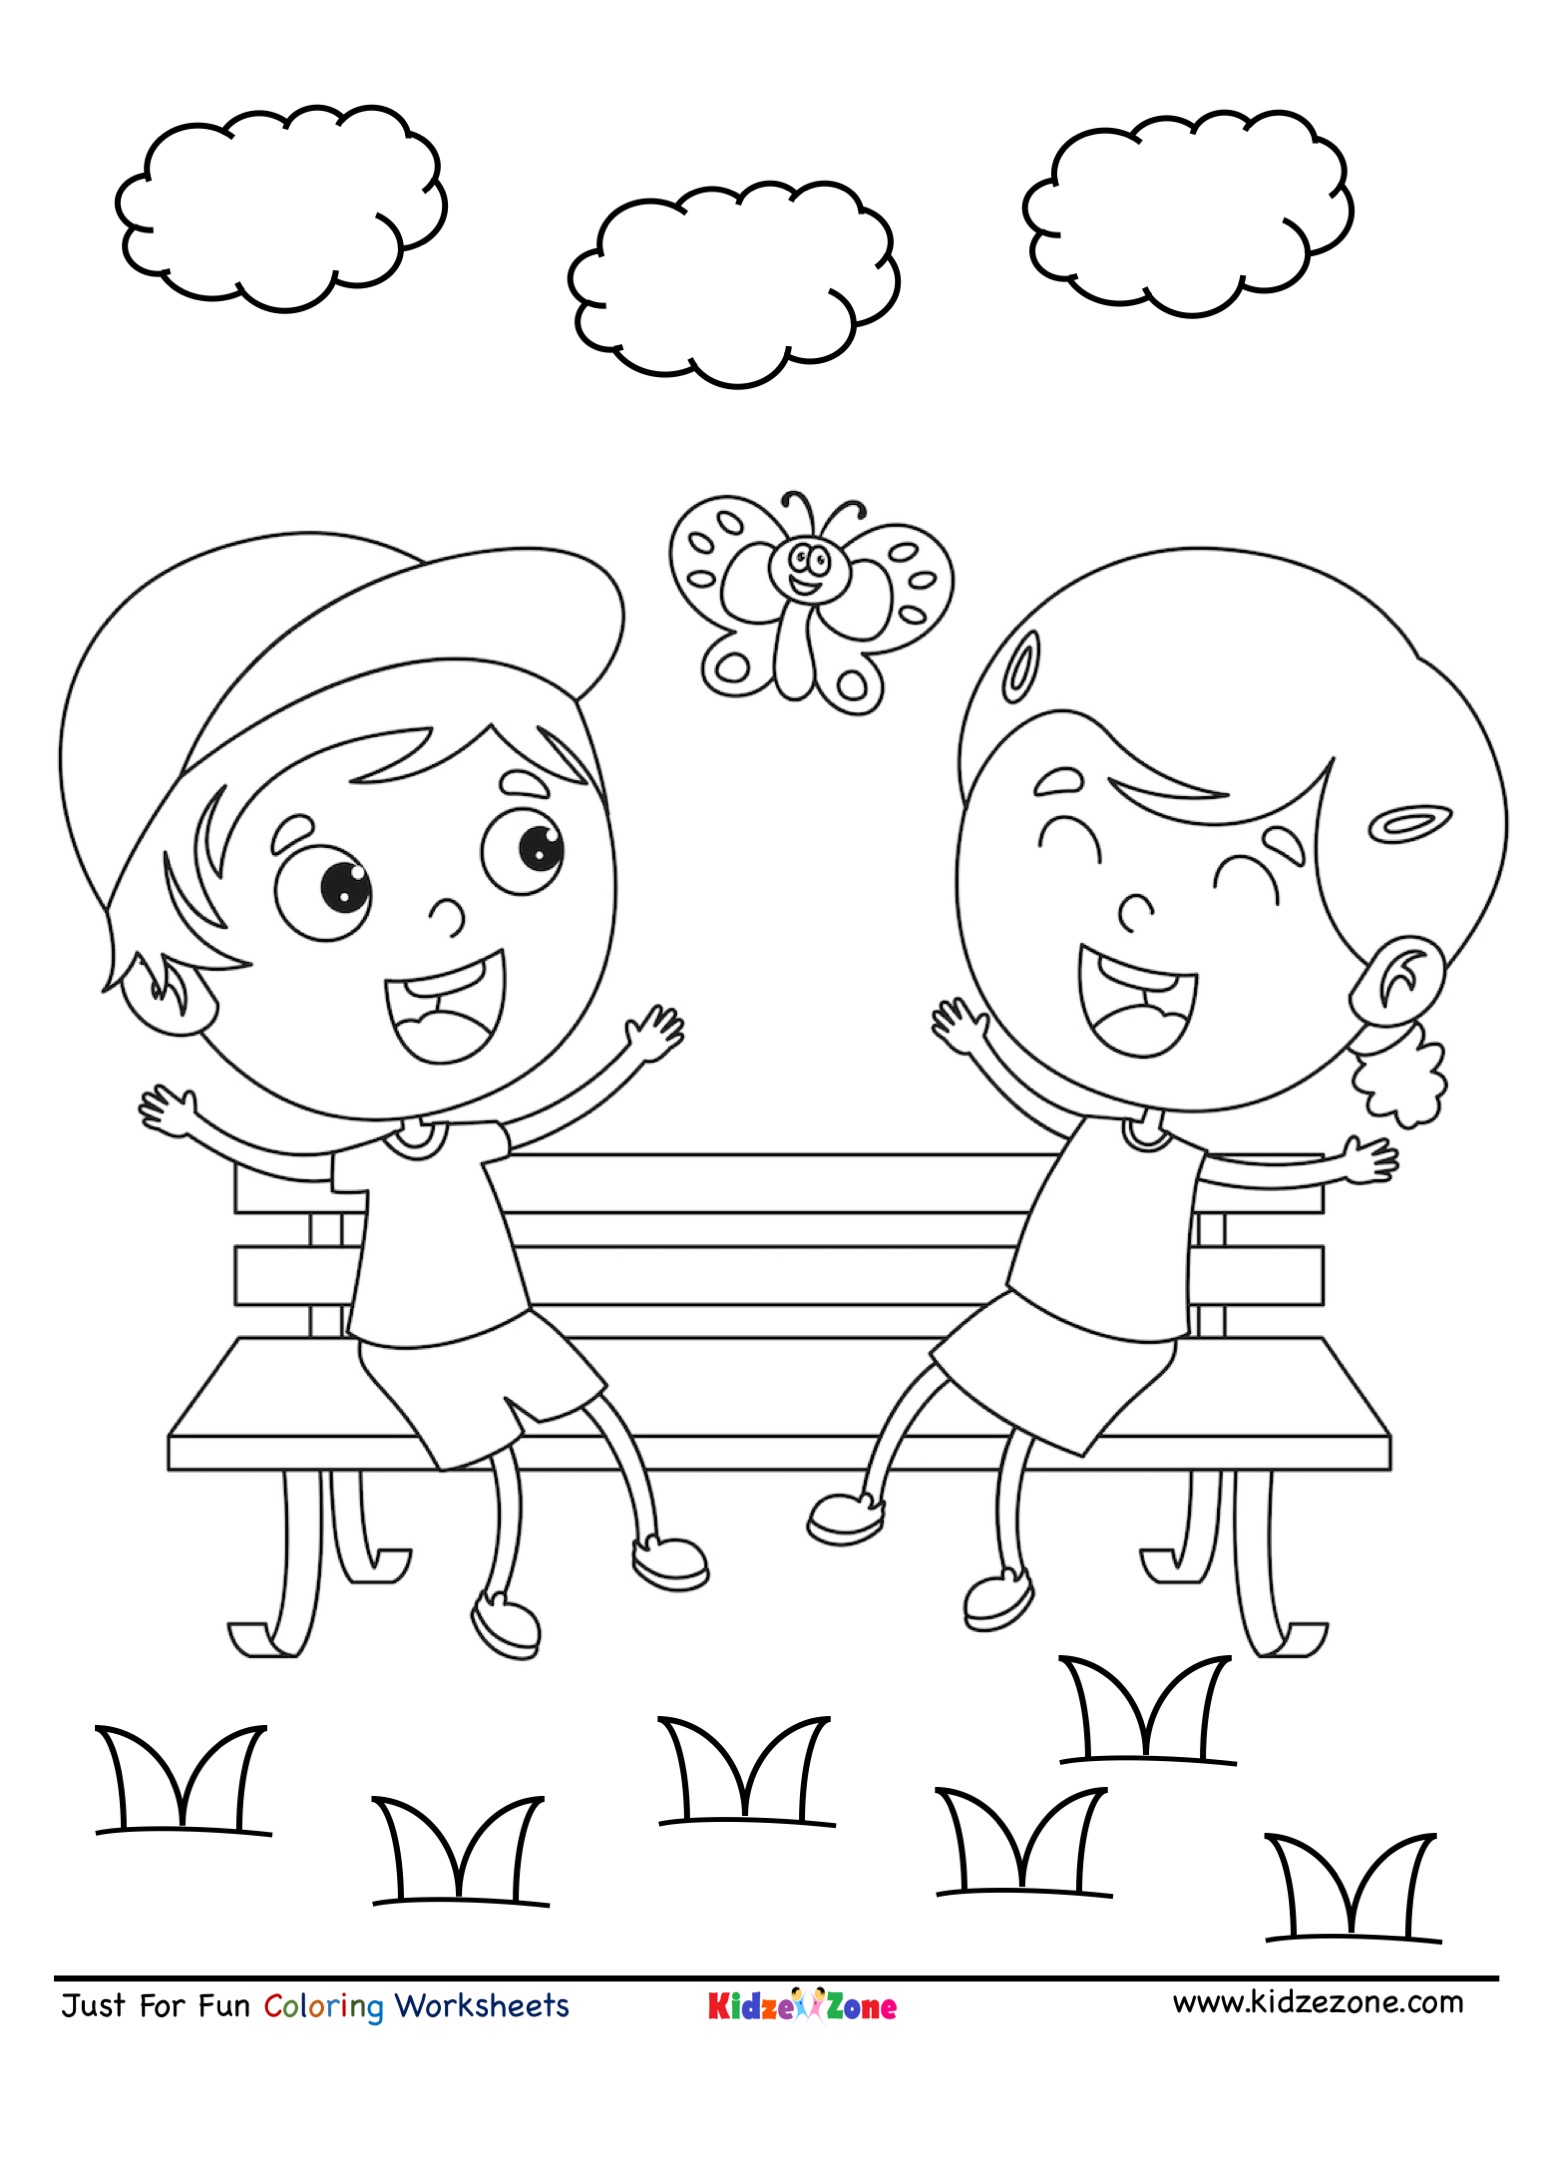 Kids chatting in Park Cartoon Coloring Page - KidzeZone